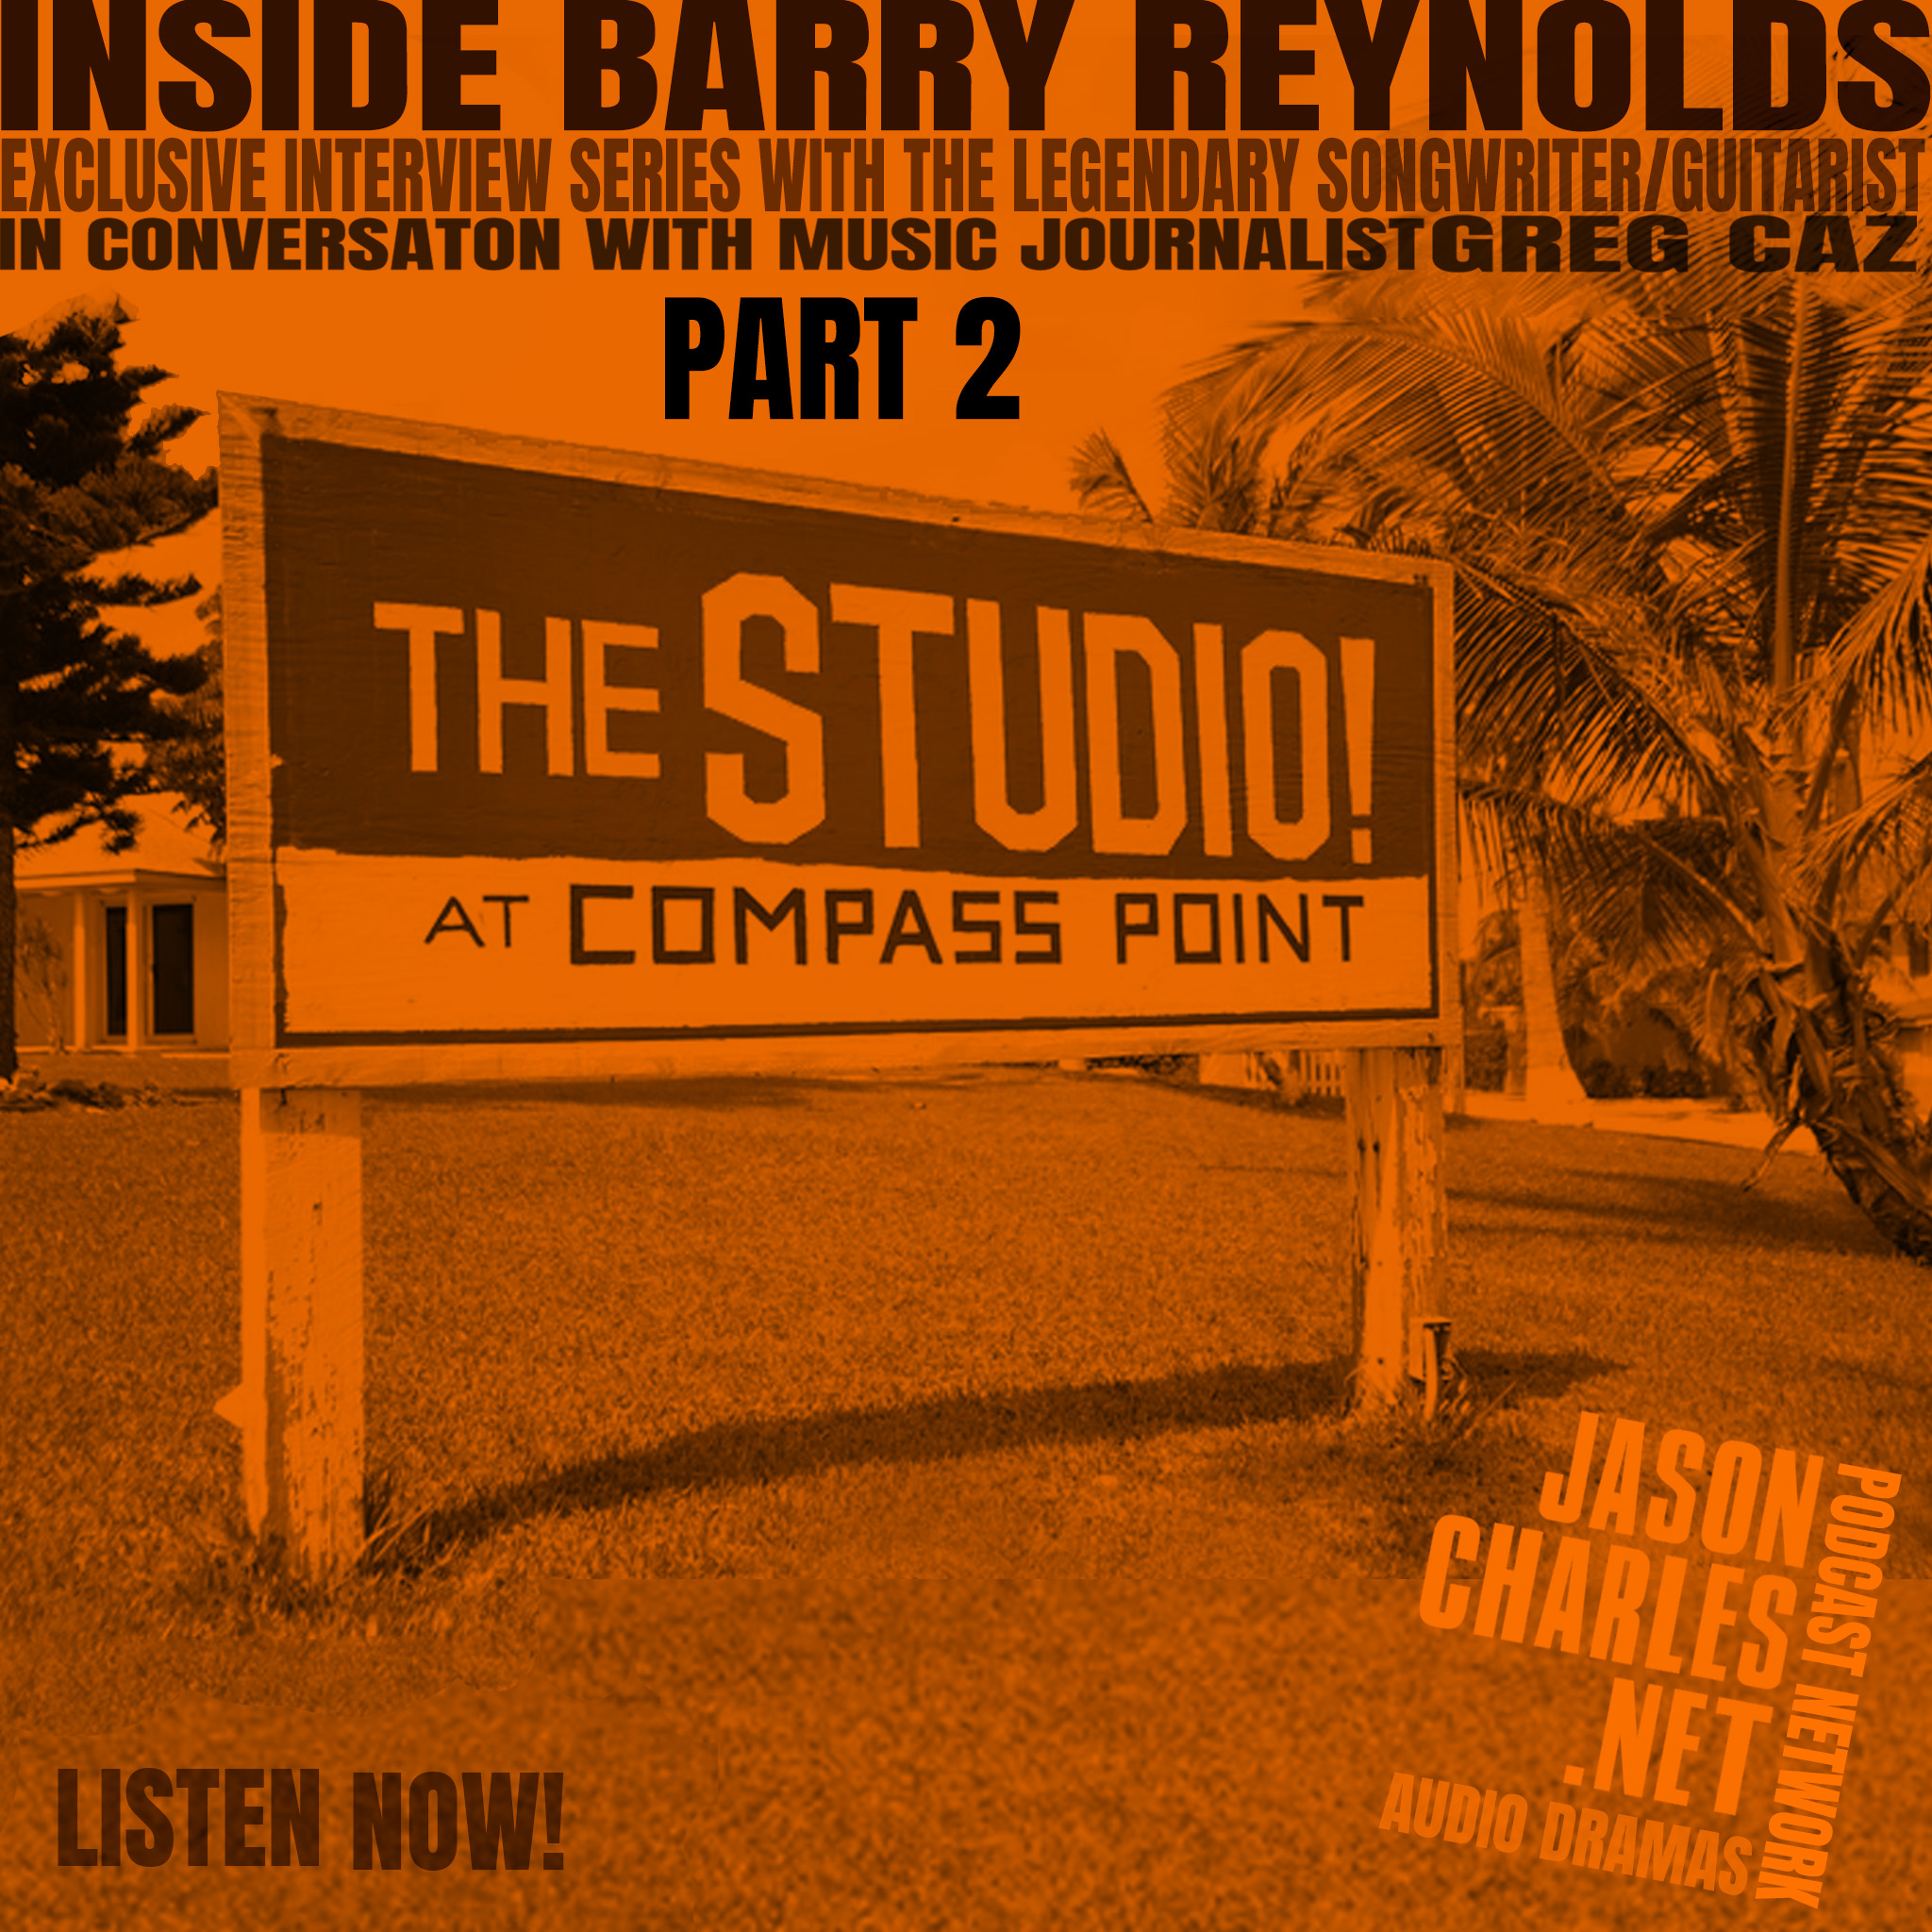 INSIDE BARRY REYNOLDS Part 2 The Compass Point Years